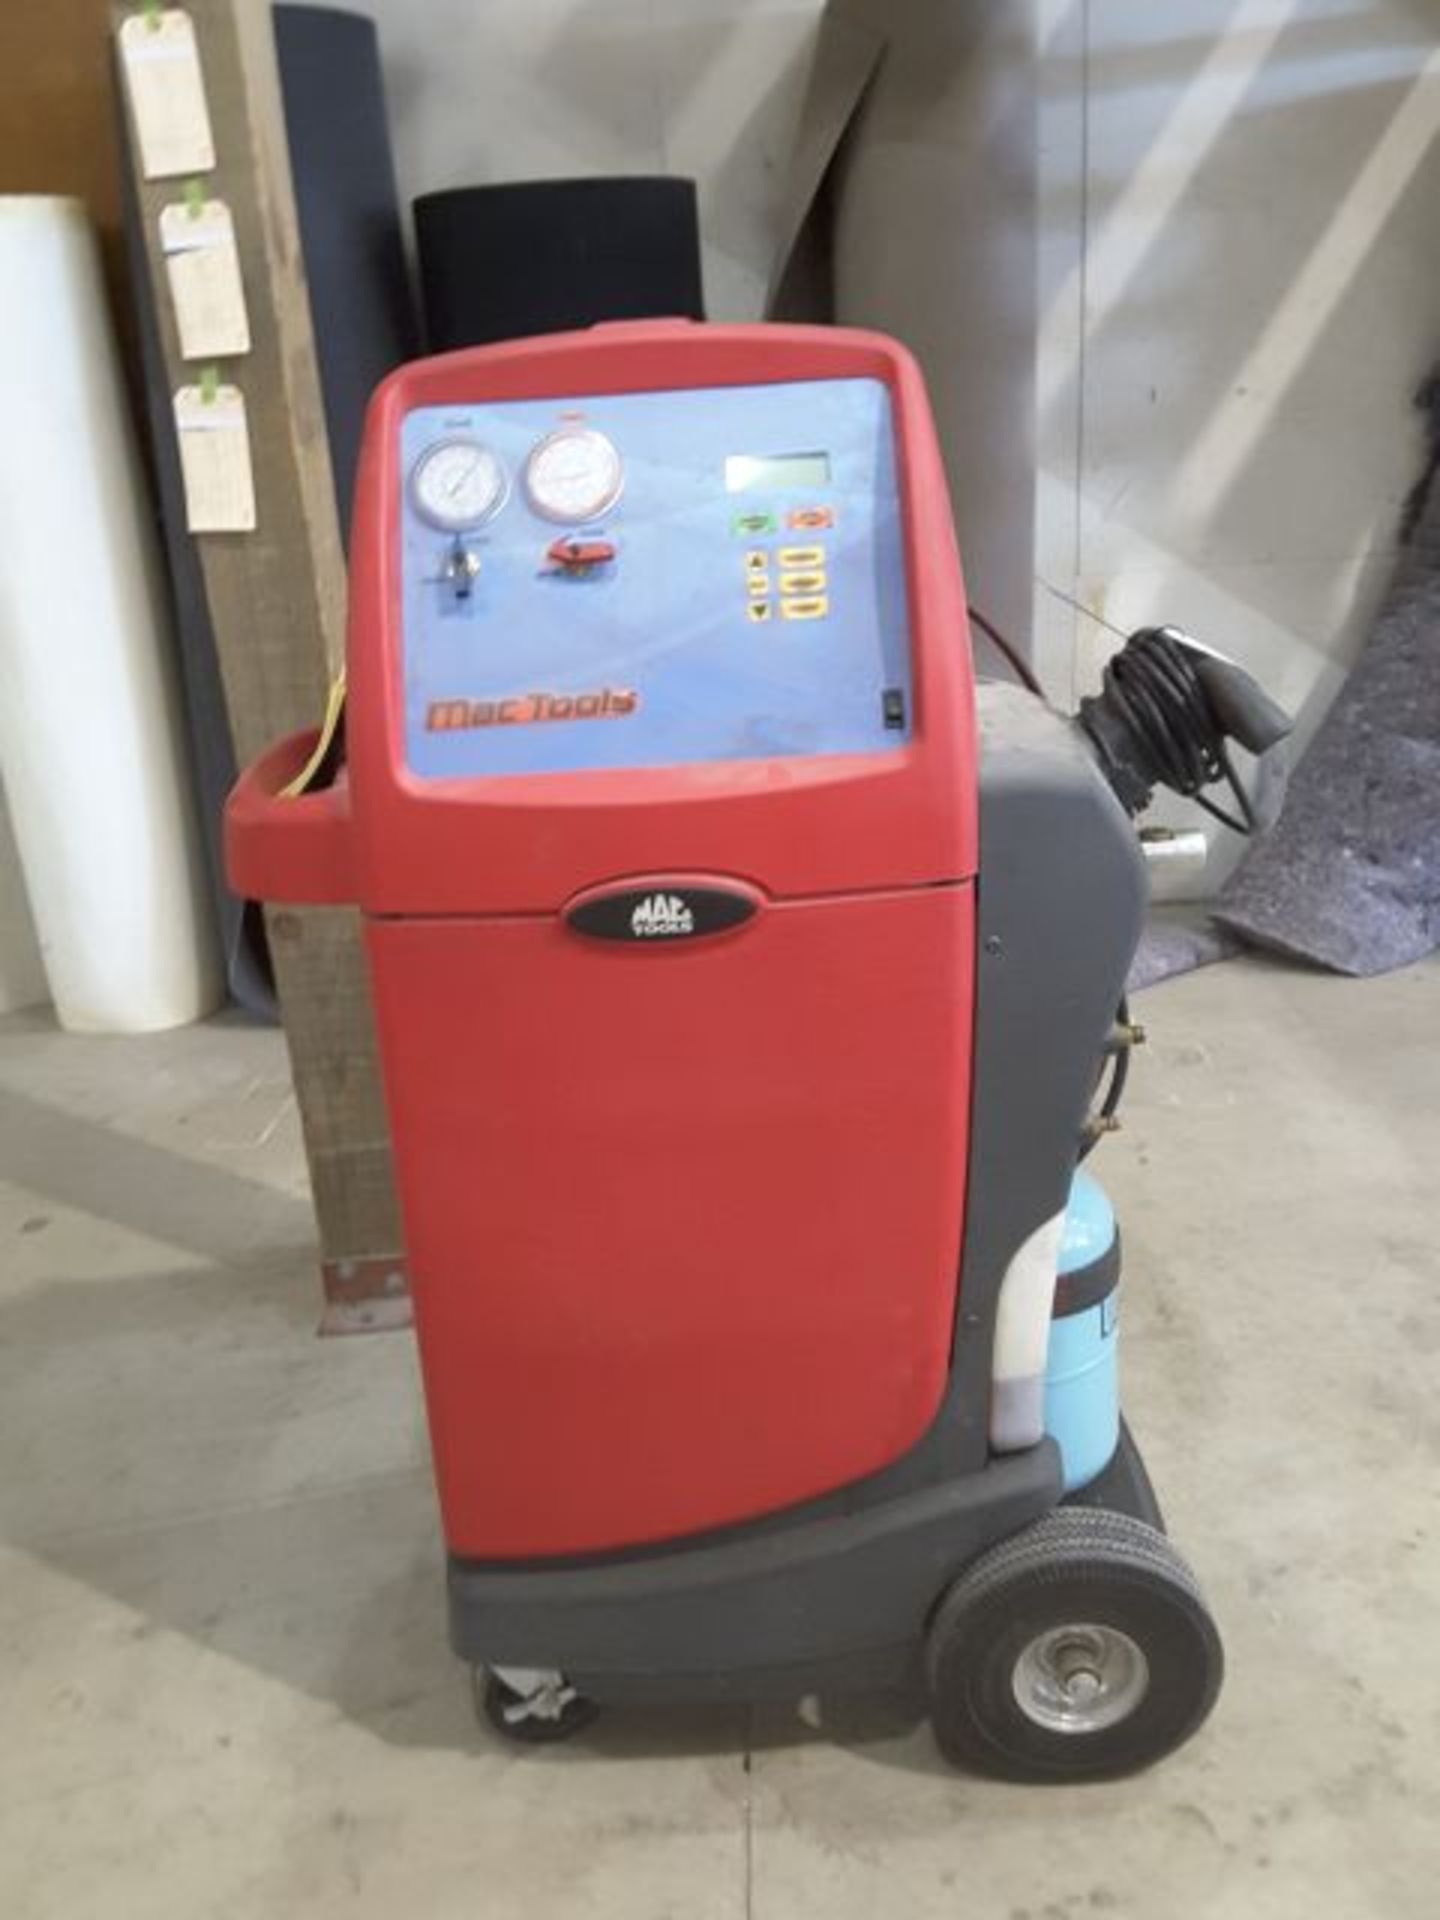 Mac tools refrigerant recovery and recharge unit model AC34288, recycling, recovery and recharging